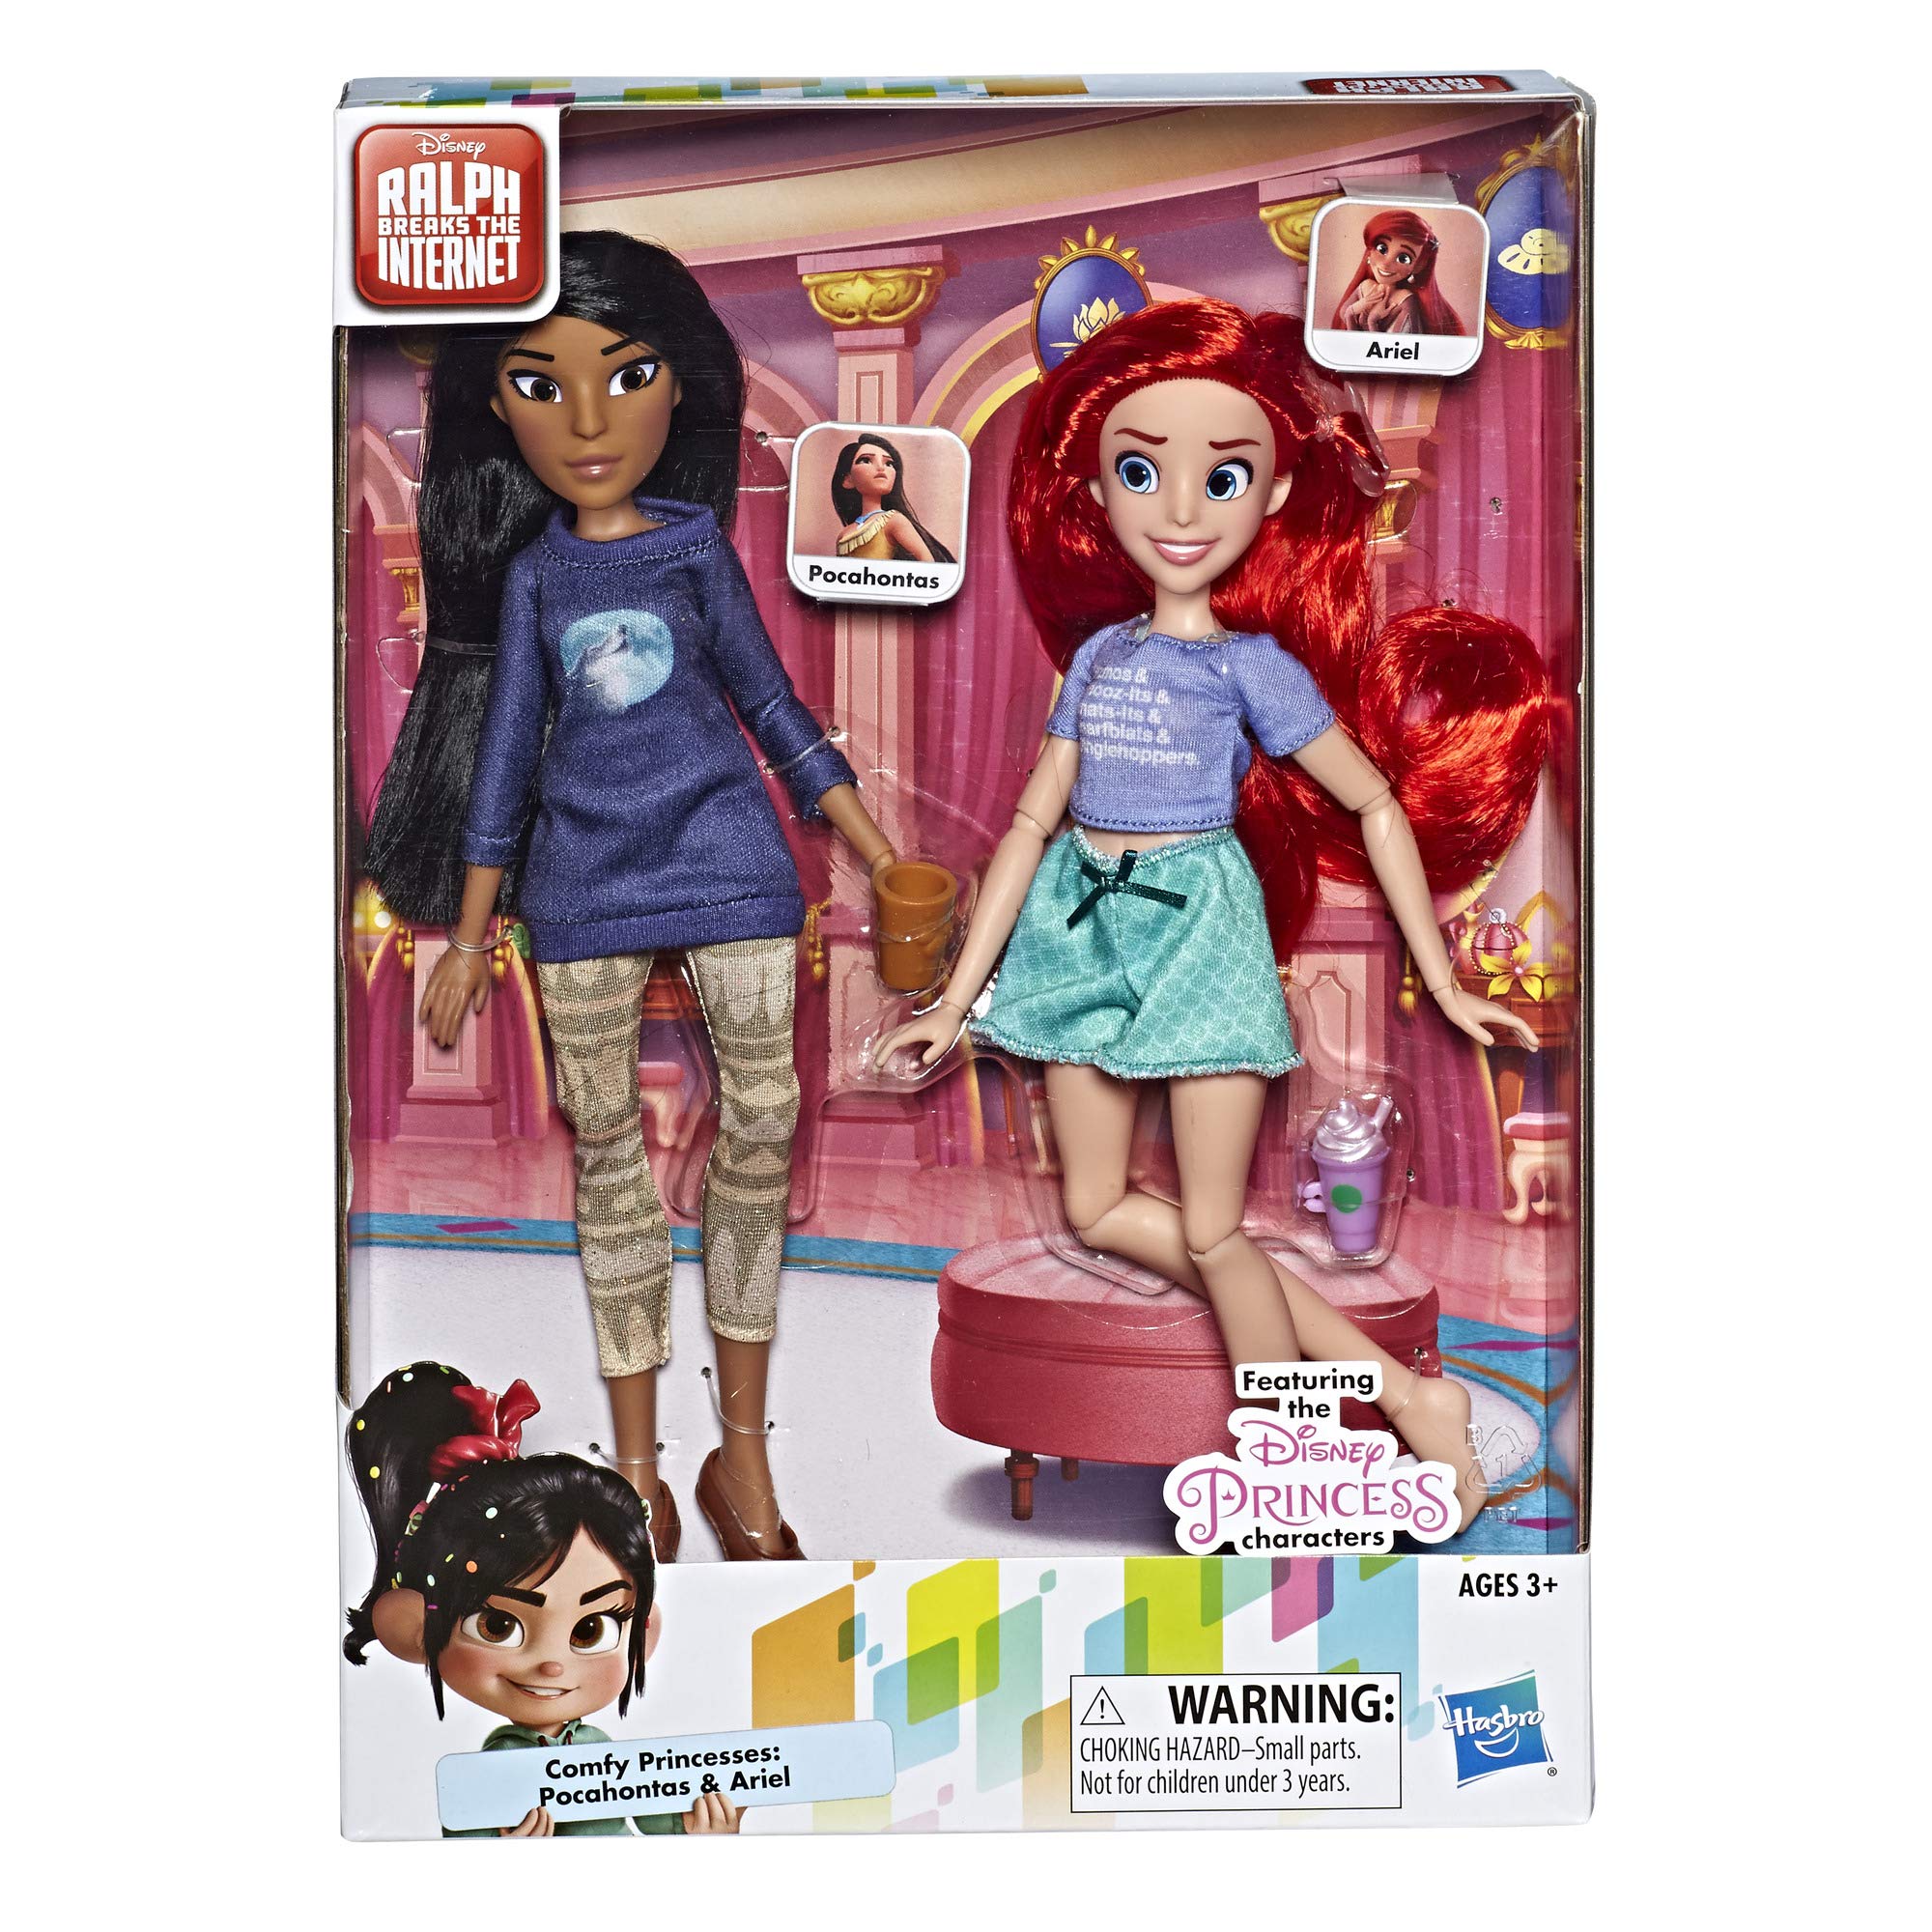 Disney Princess Ralph Breaks The Internet Movie Dolls, Ariel and Pocahontas Dolls with Comfy Clothes and Accessories